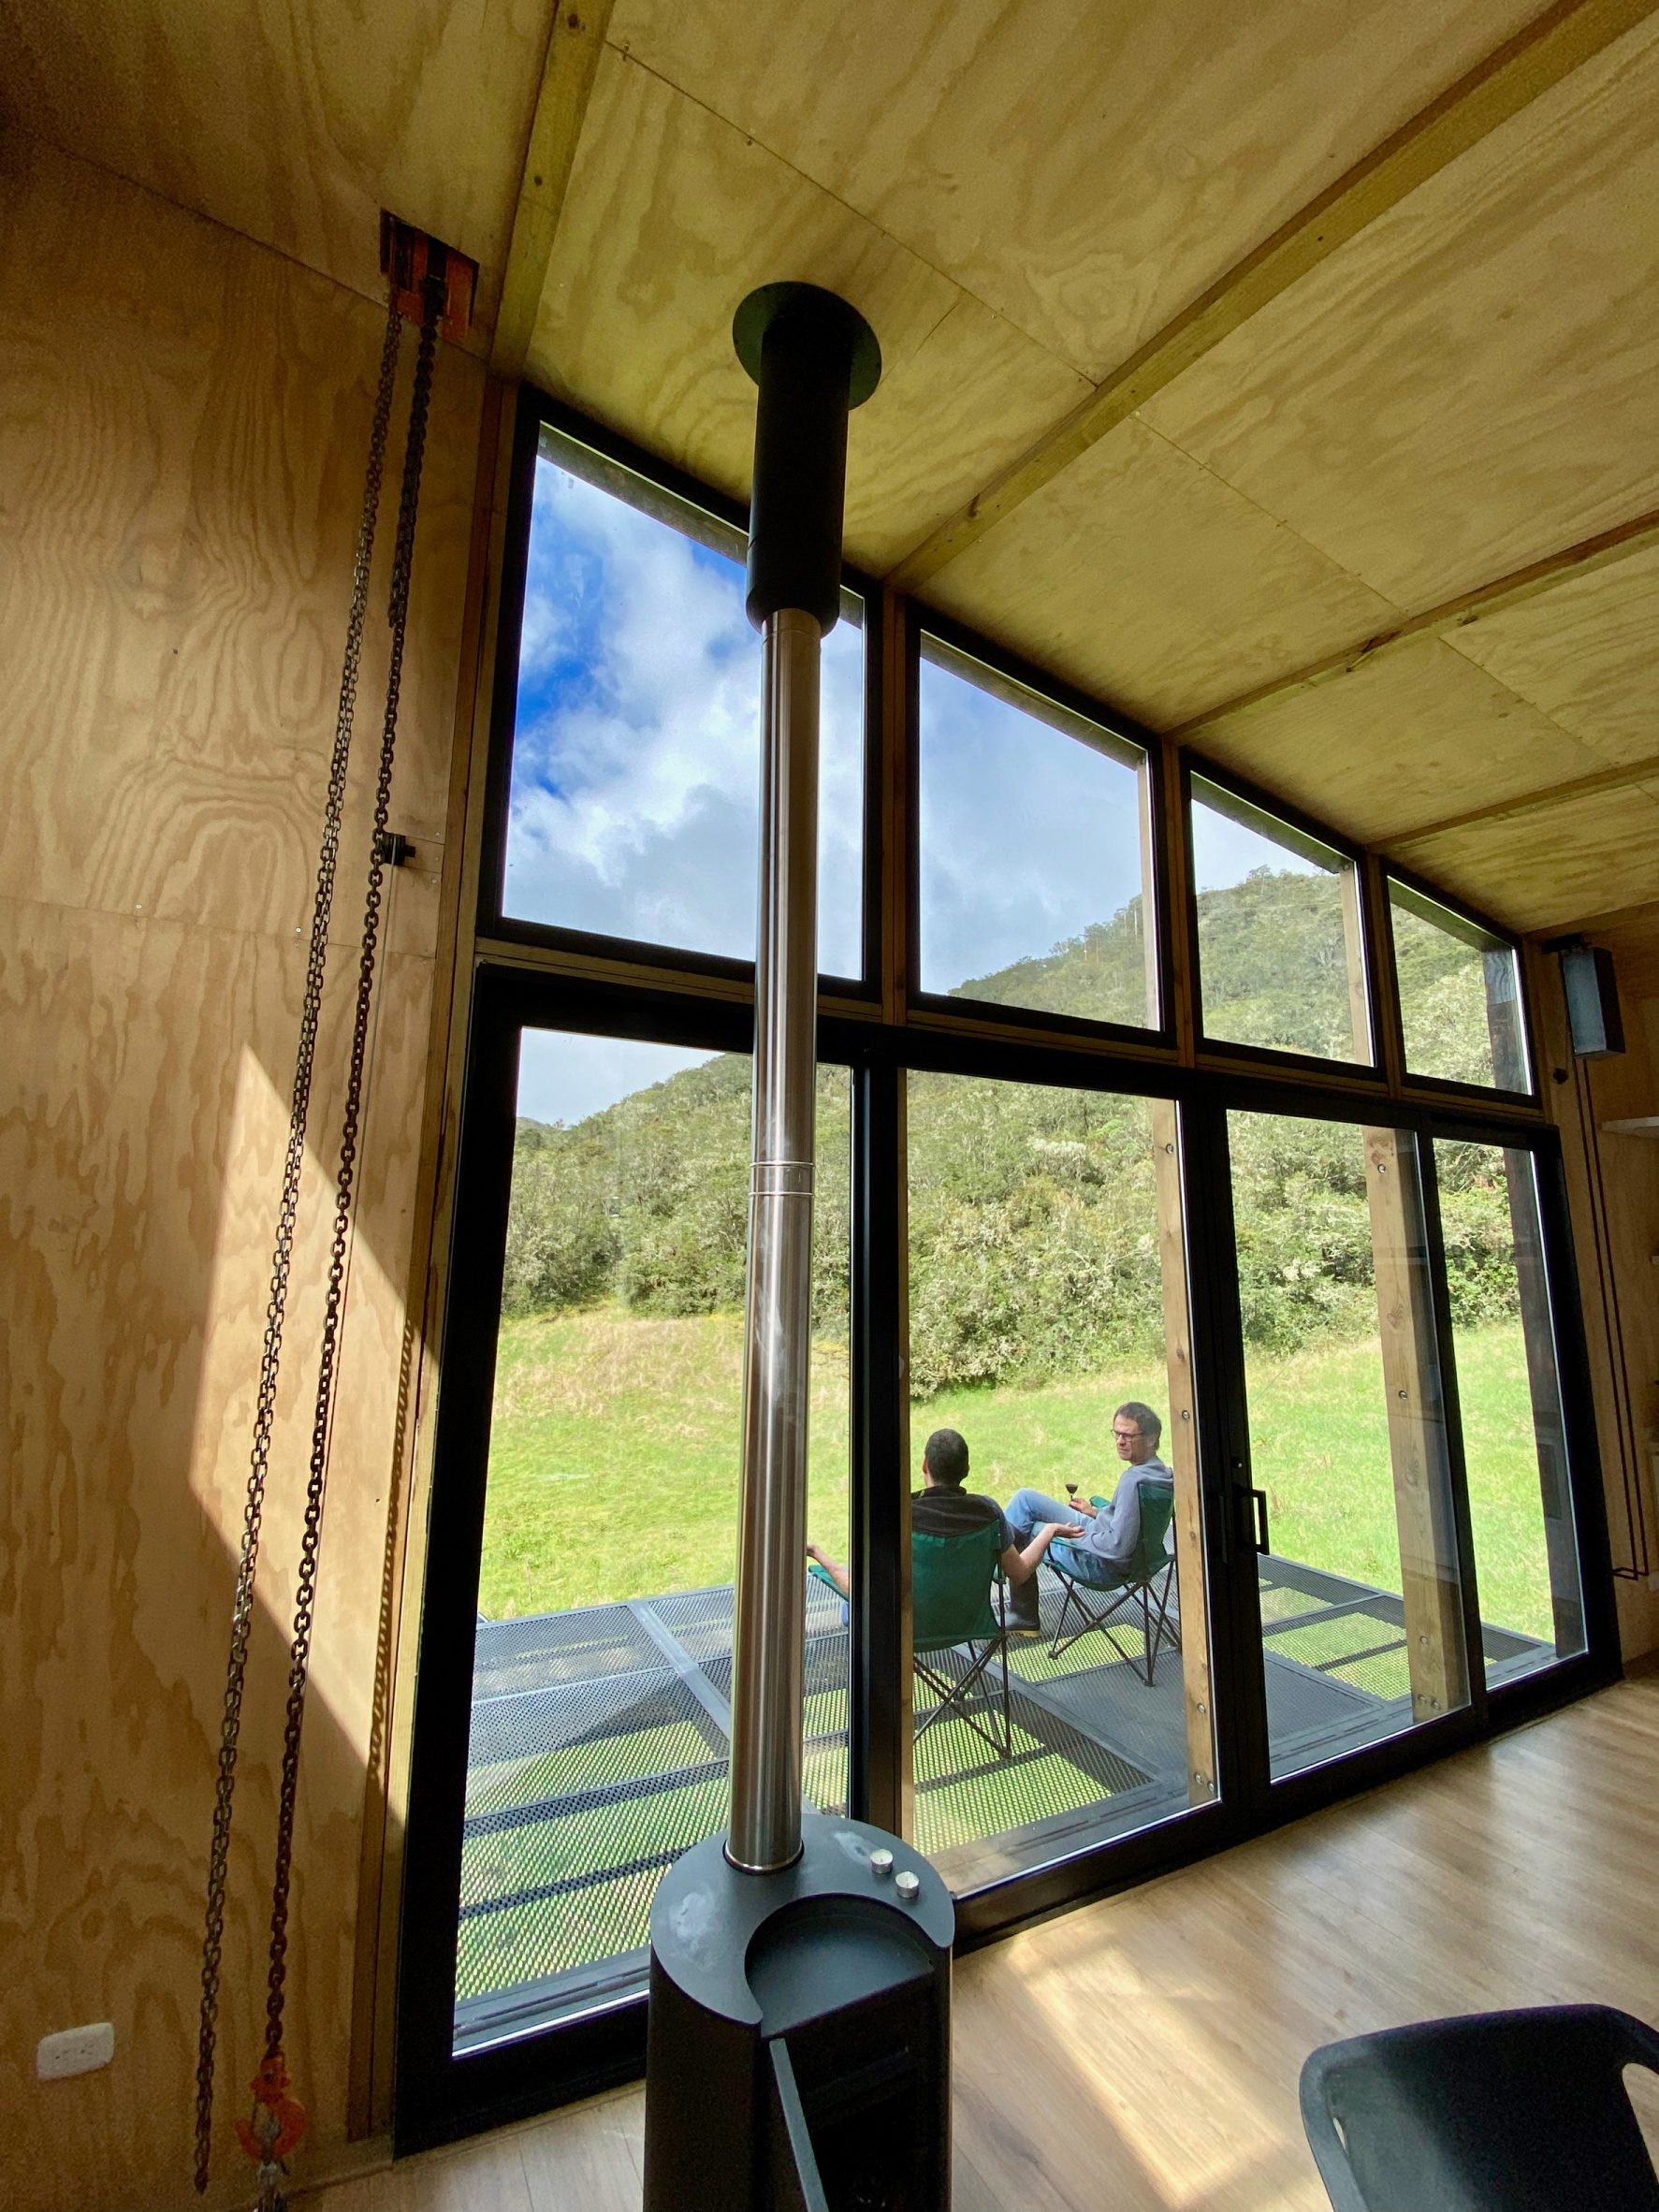 ZITA raises House in the Andean Moorland above a fragile ecosystem